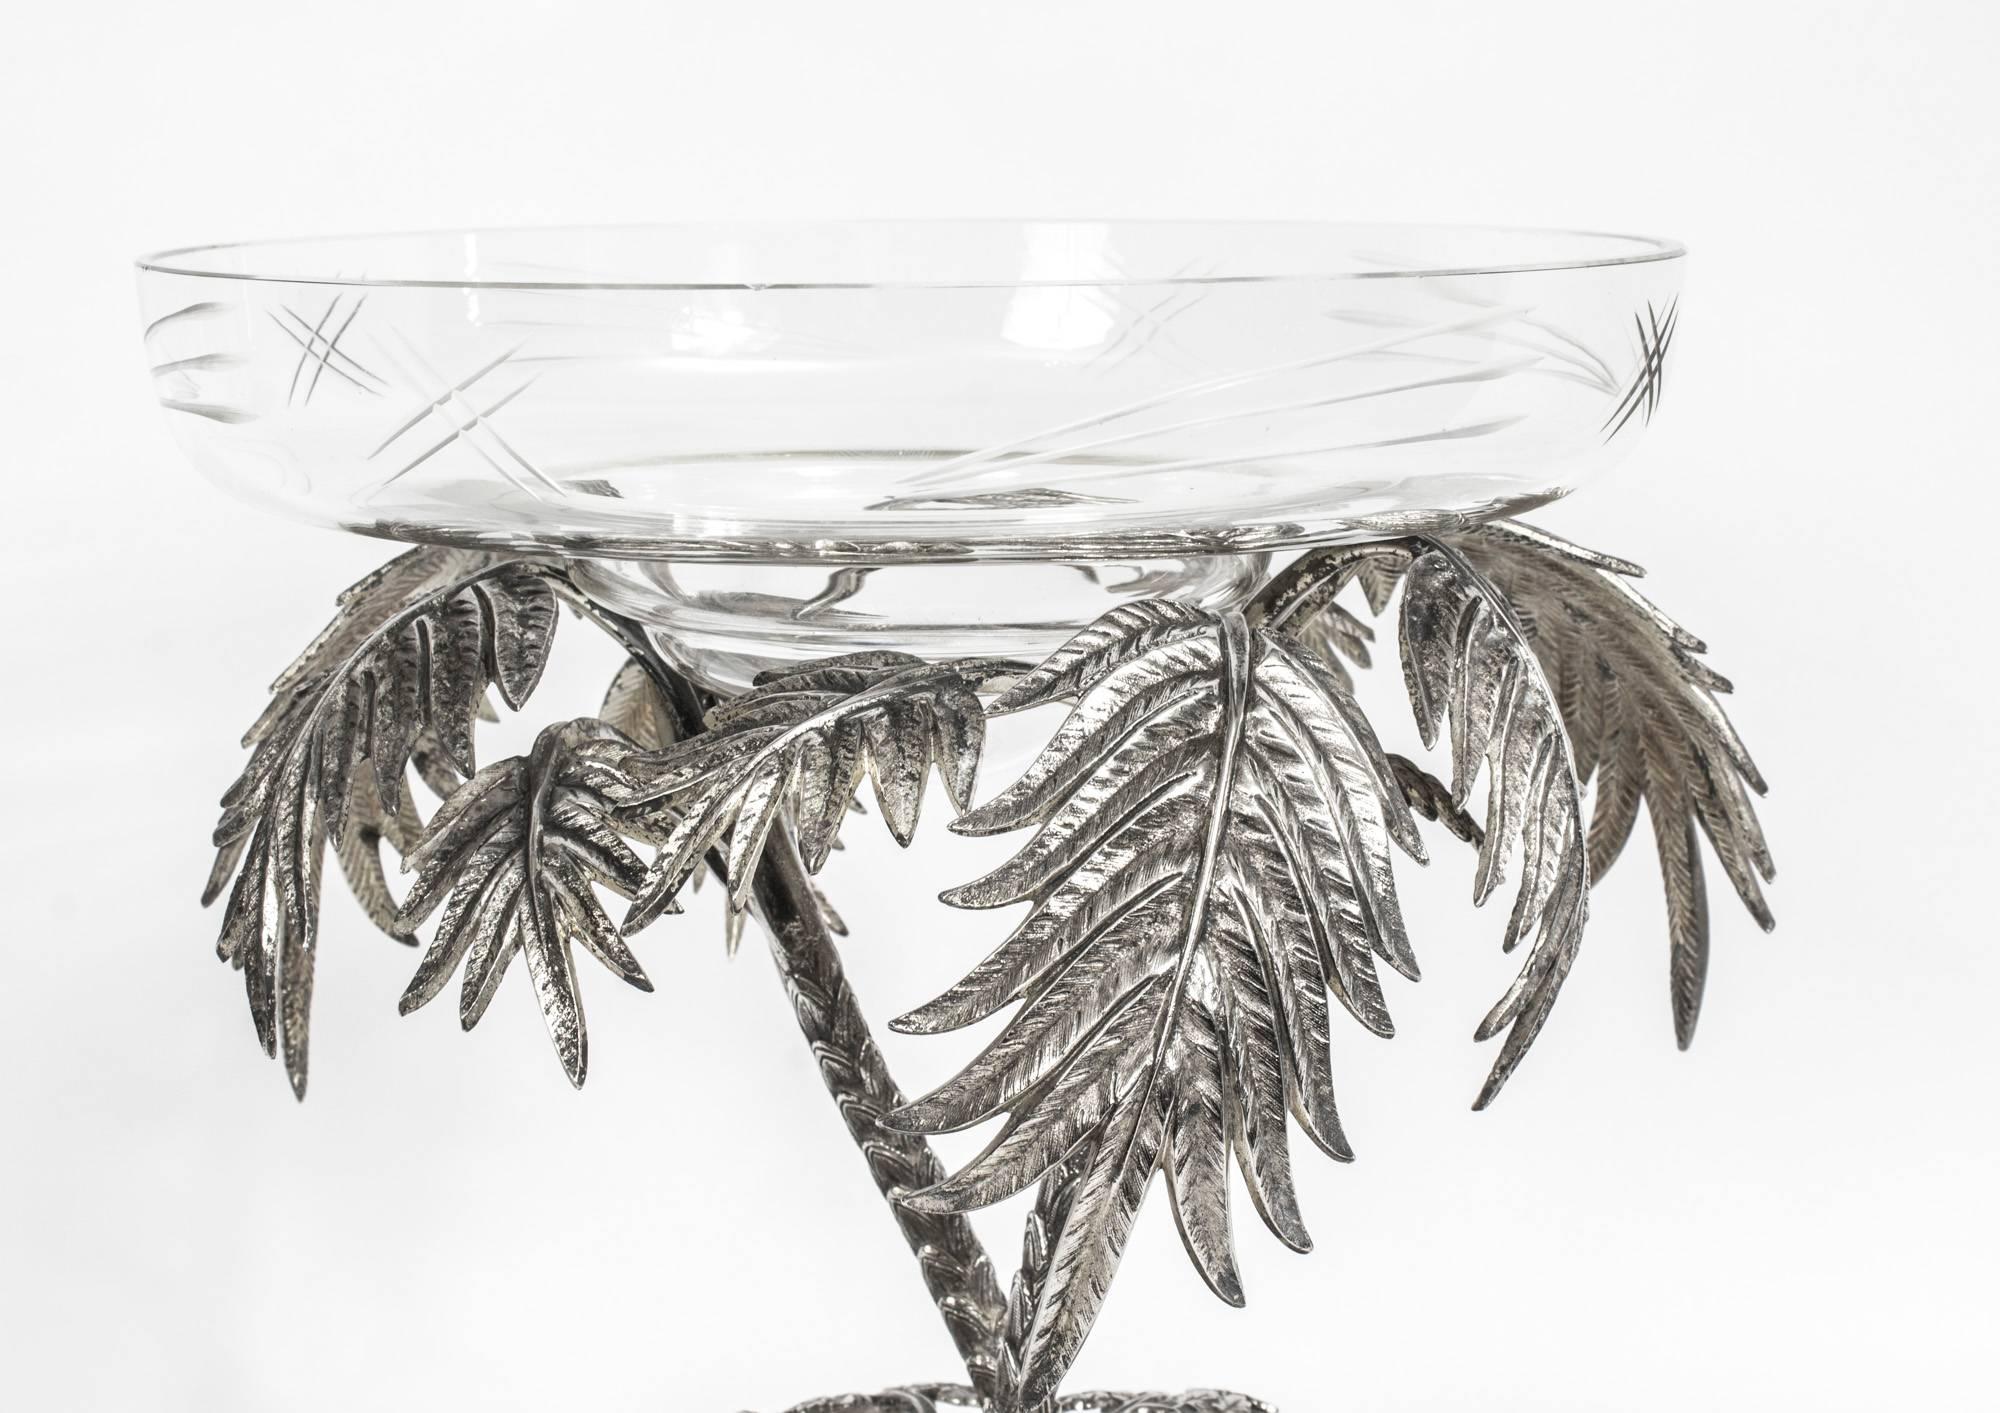 English Antique Victorian Silver Plated Palm Tree Centrepiece Mirrored Base, circa 1860